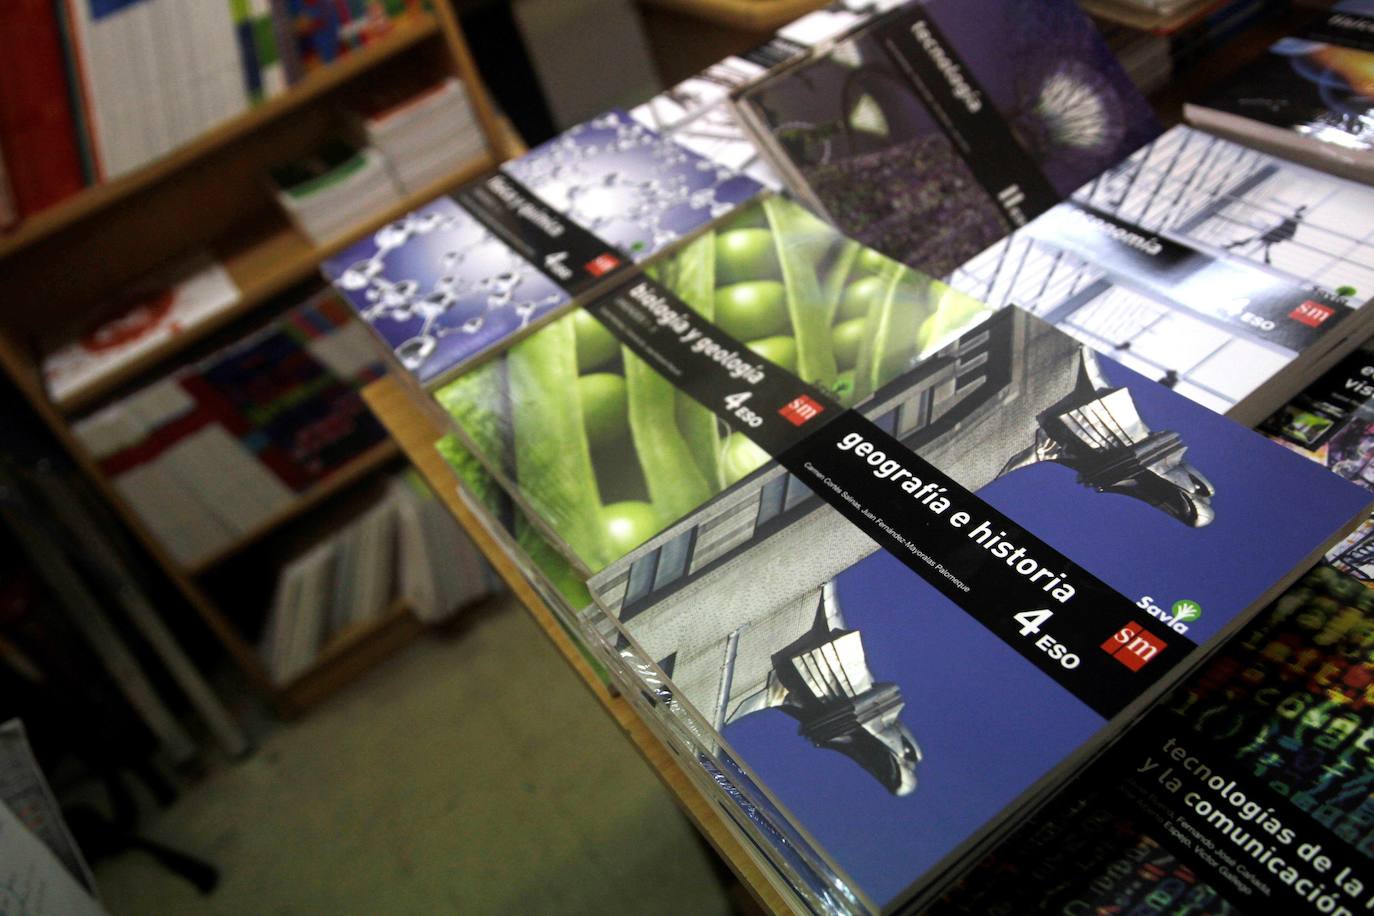 An archive image of ESO fourth grade textbooks.